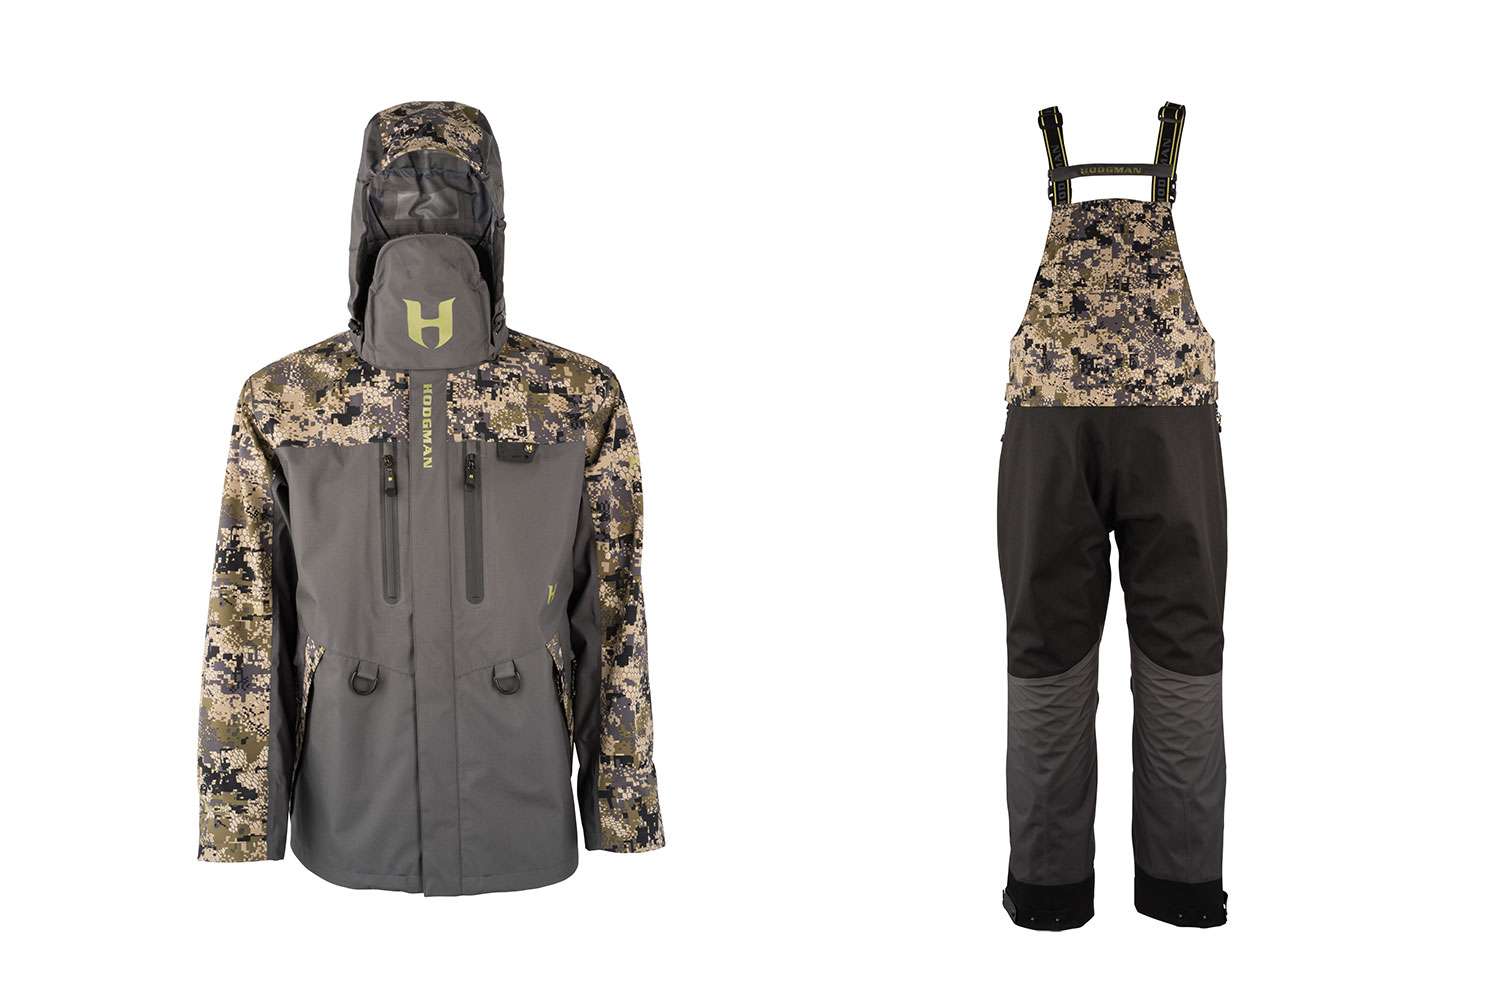 <p><b>Hodgman H5 Storm Suit & Bib, $299.95 each</b></p> The Hodgman H5 Storm suit system features three-layer waterproof/windproof V-TecH breathable fabric and fully taped seams.  Other features include Cordura 500 denier seat and sleeves, an easy stow faceguard and storm tight cinch cuffs.<br> <a href=